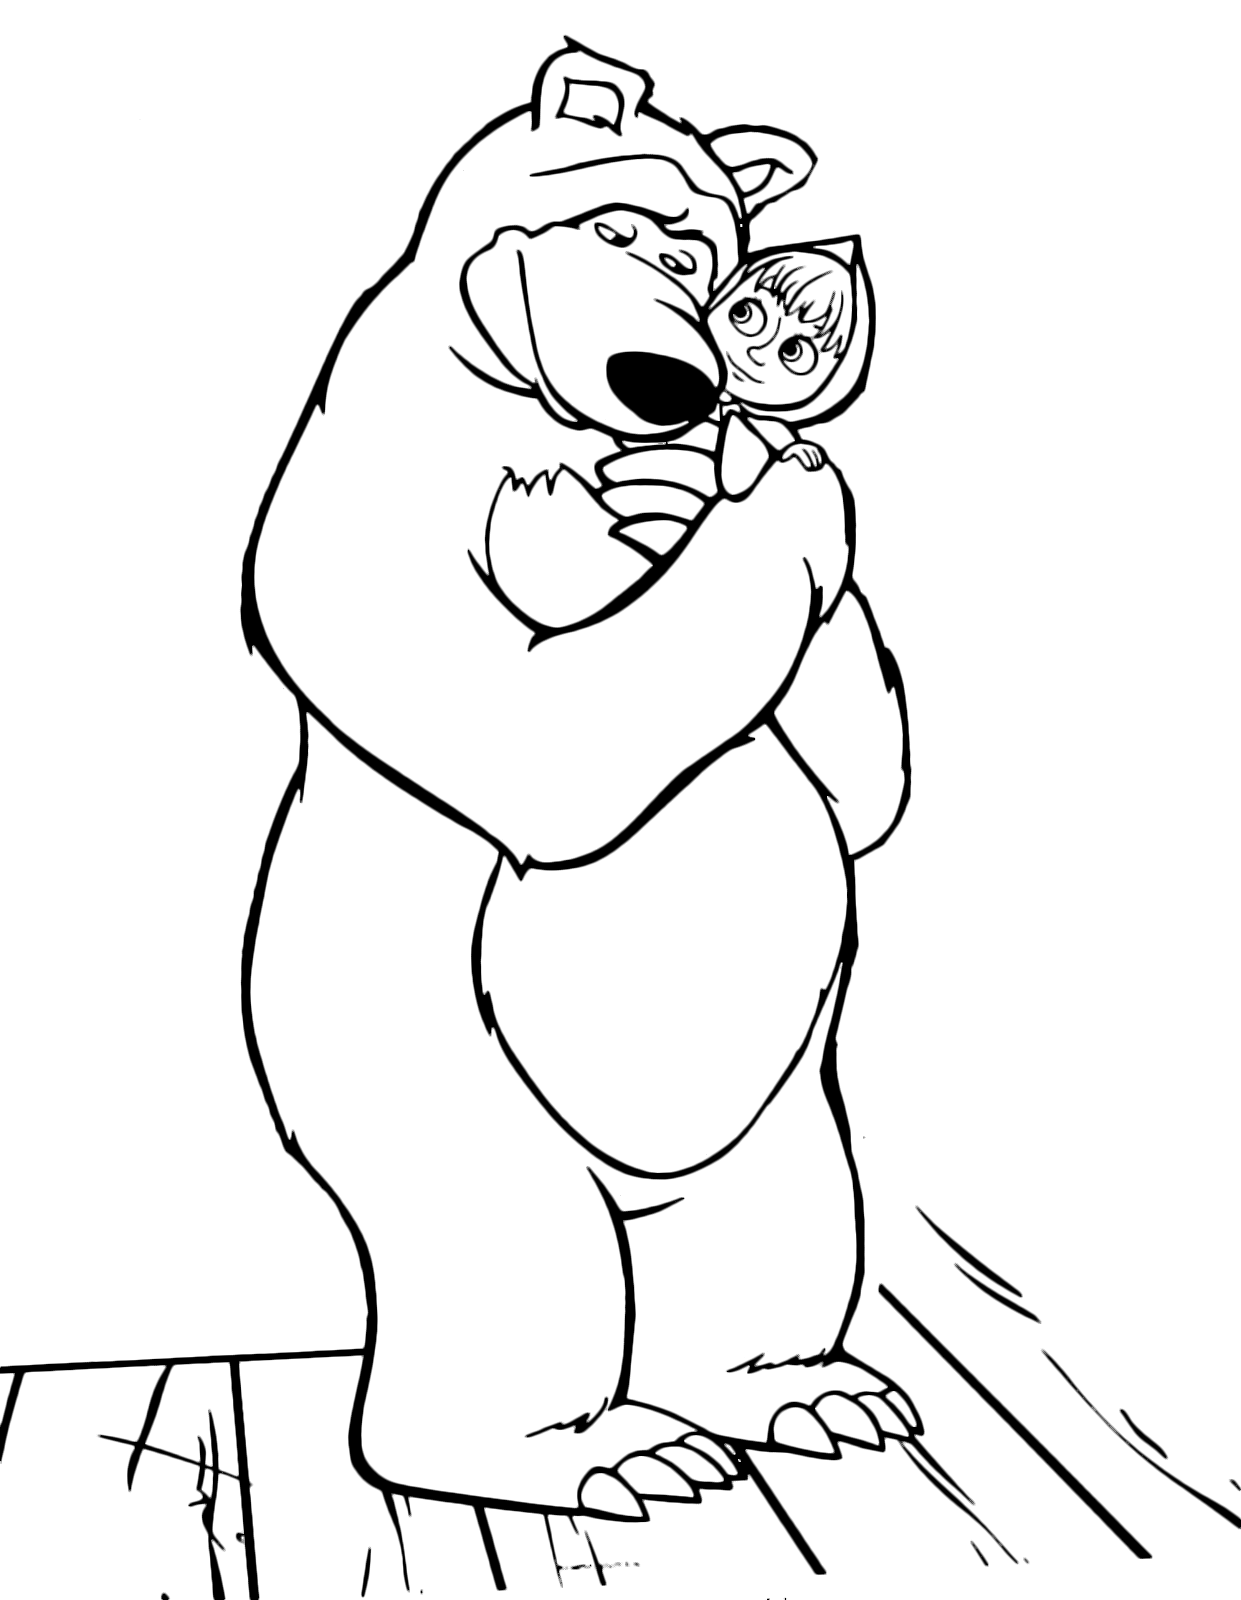 "Masha and the Bear" coloring pages